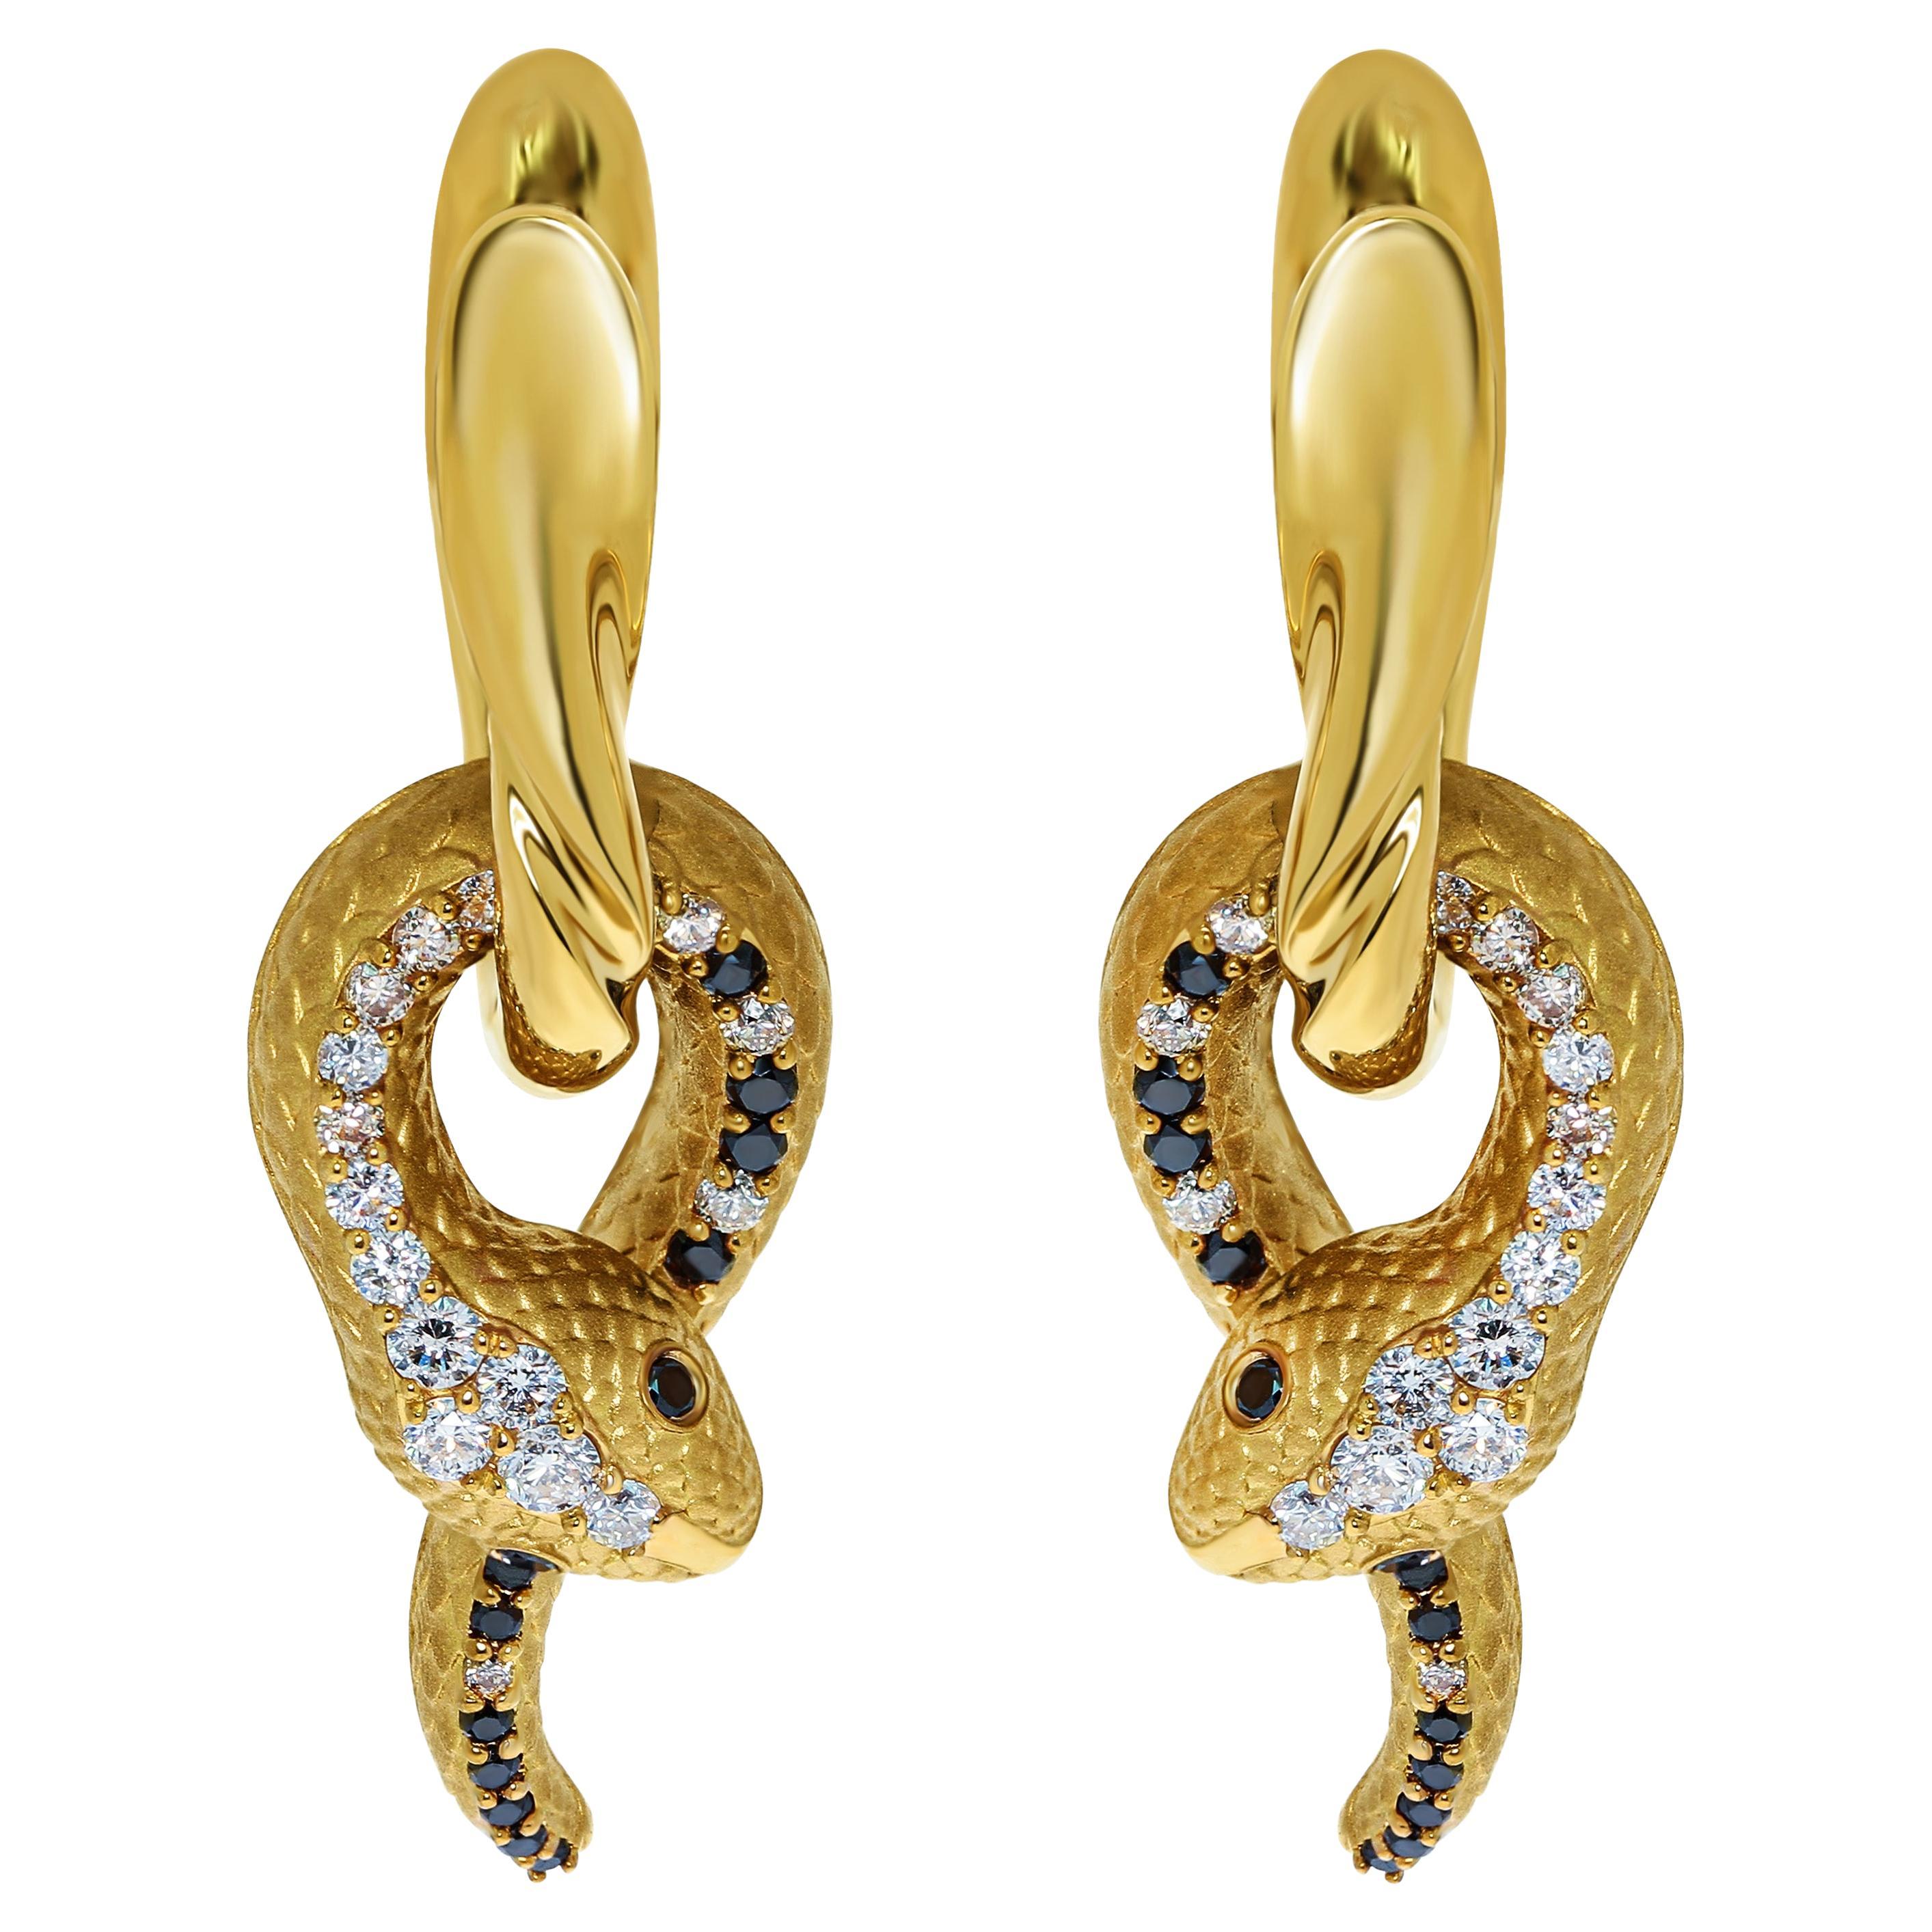 White, Champagne and Black Diamonds 18 Karat Yellow Gold Snake Earrings For Sale